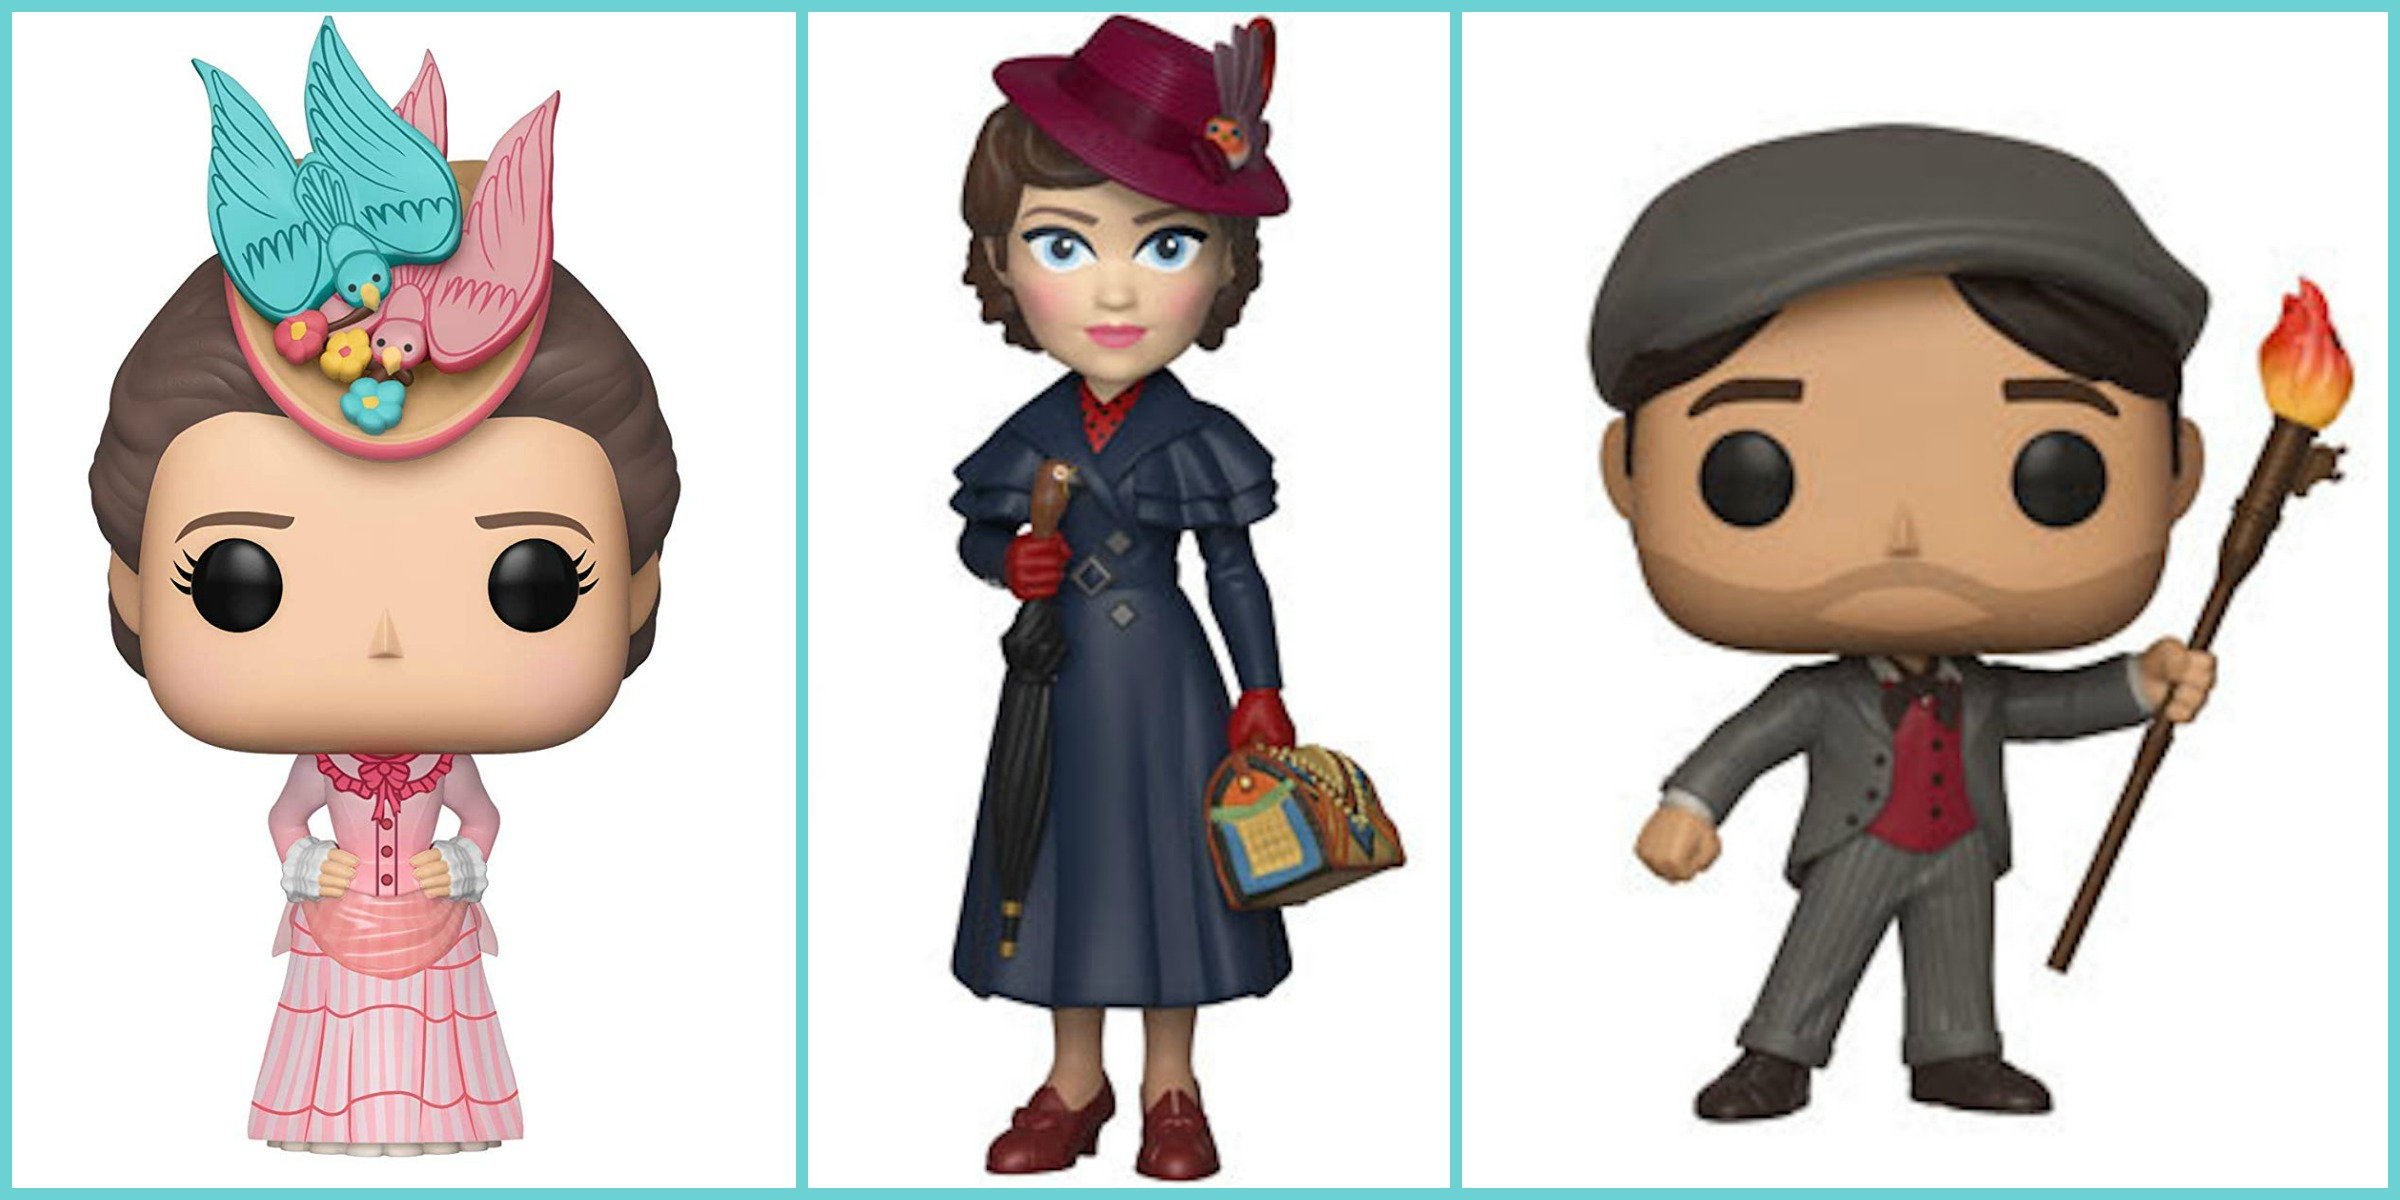 Mary Poppins Returns Figures